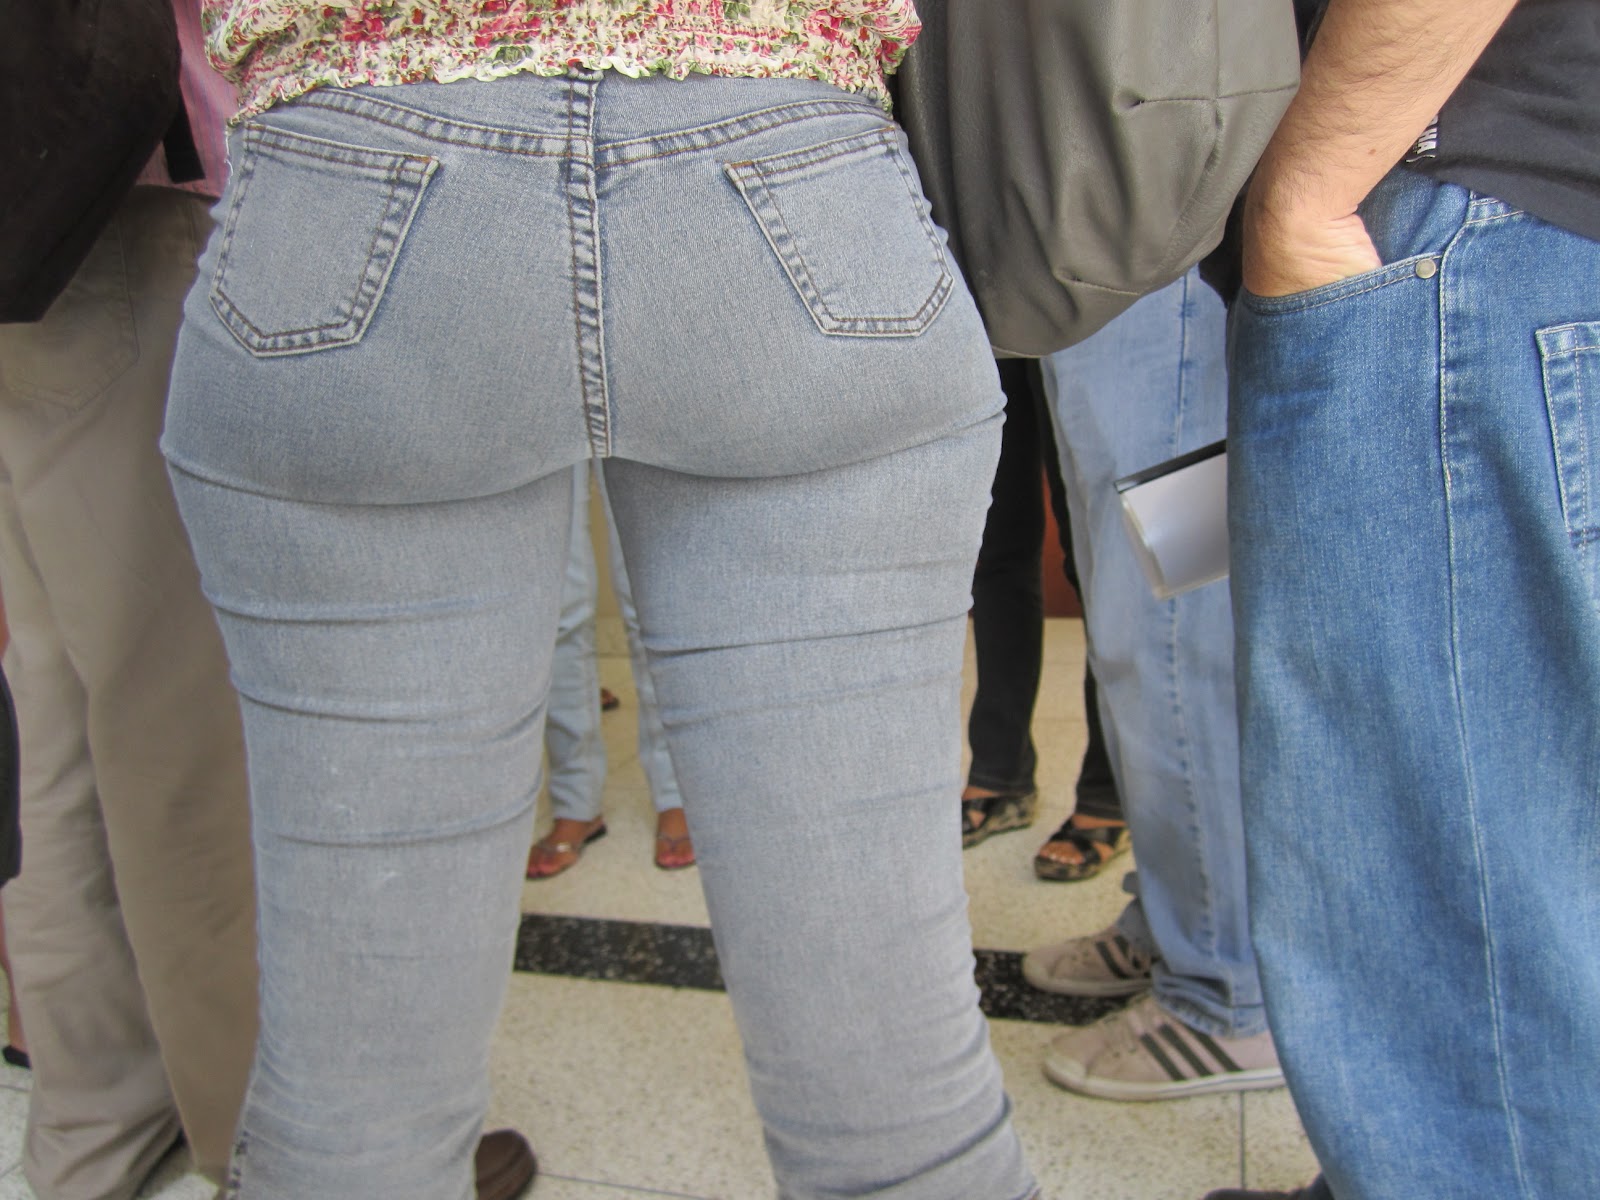 Round Ass In Candid Jeans Grays Divine Butts Candid Milfs In Public